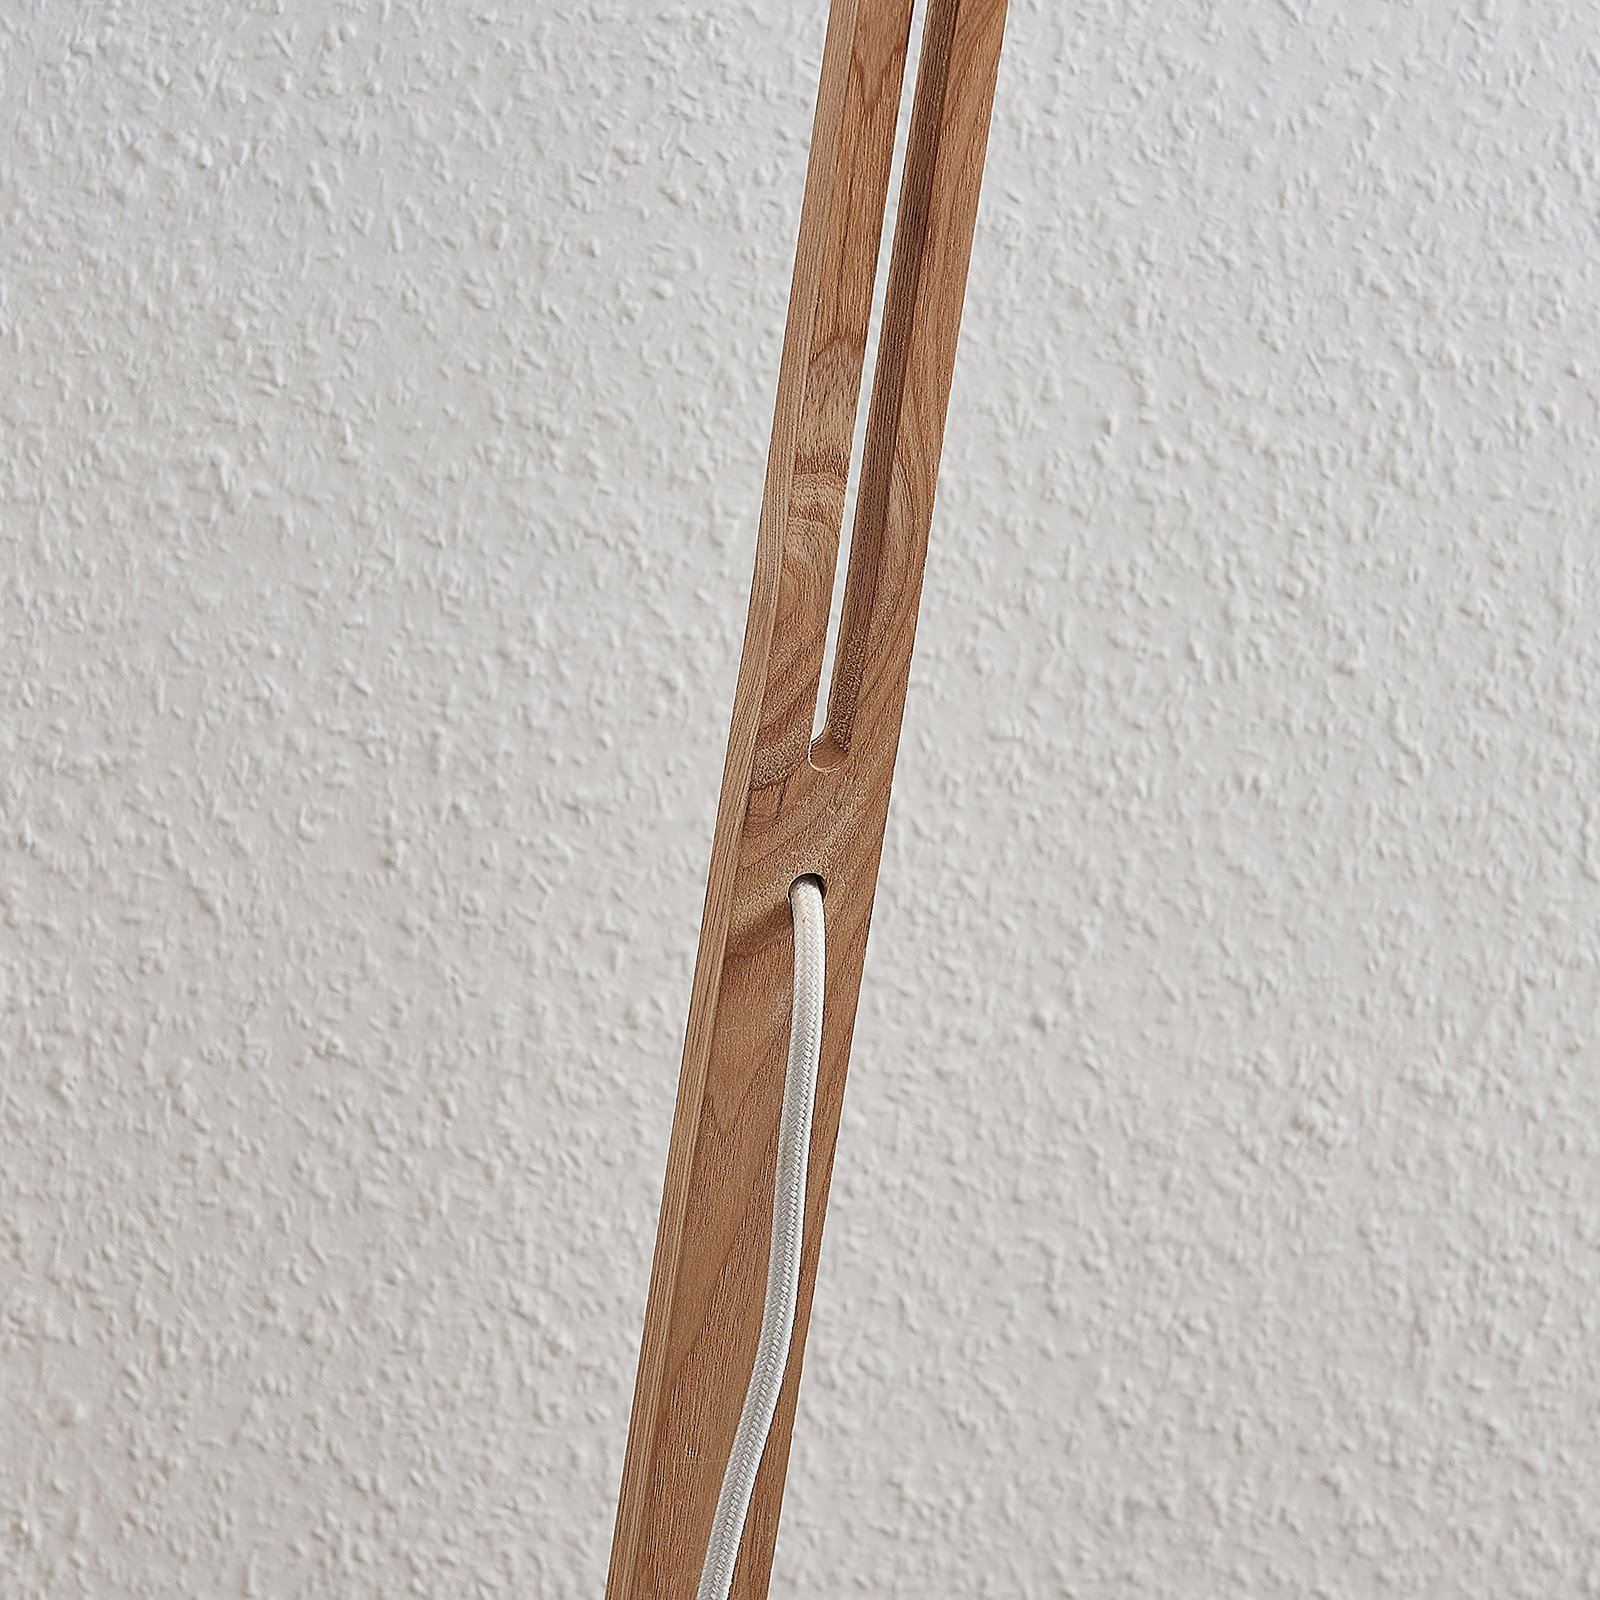 Lindby Tetja floor lamp with a wooden rod